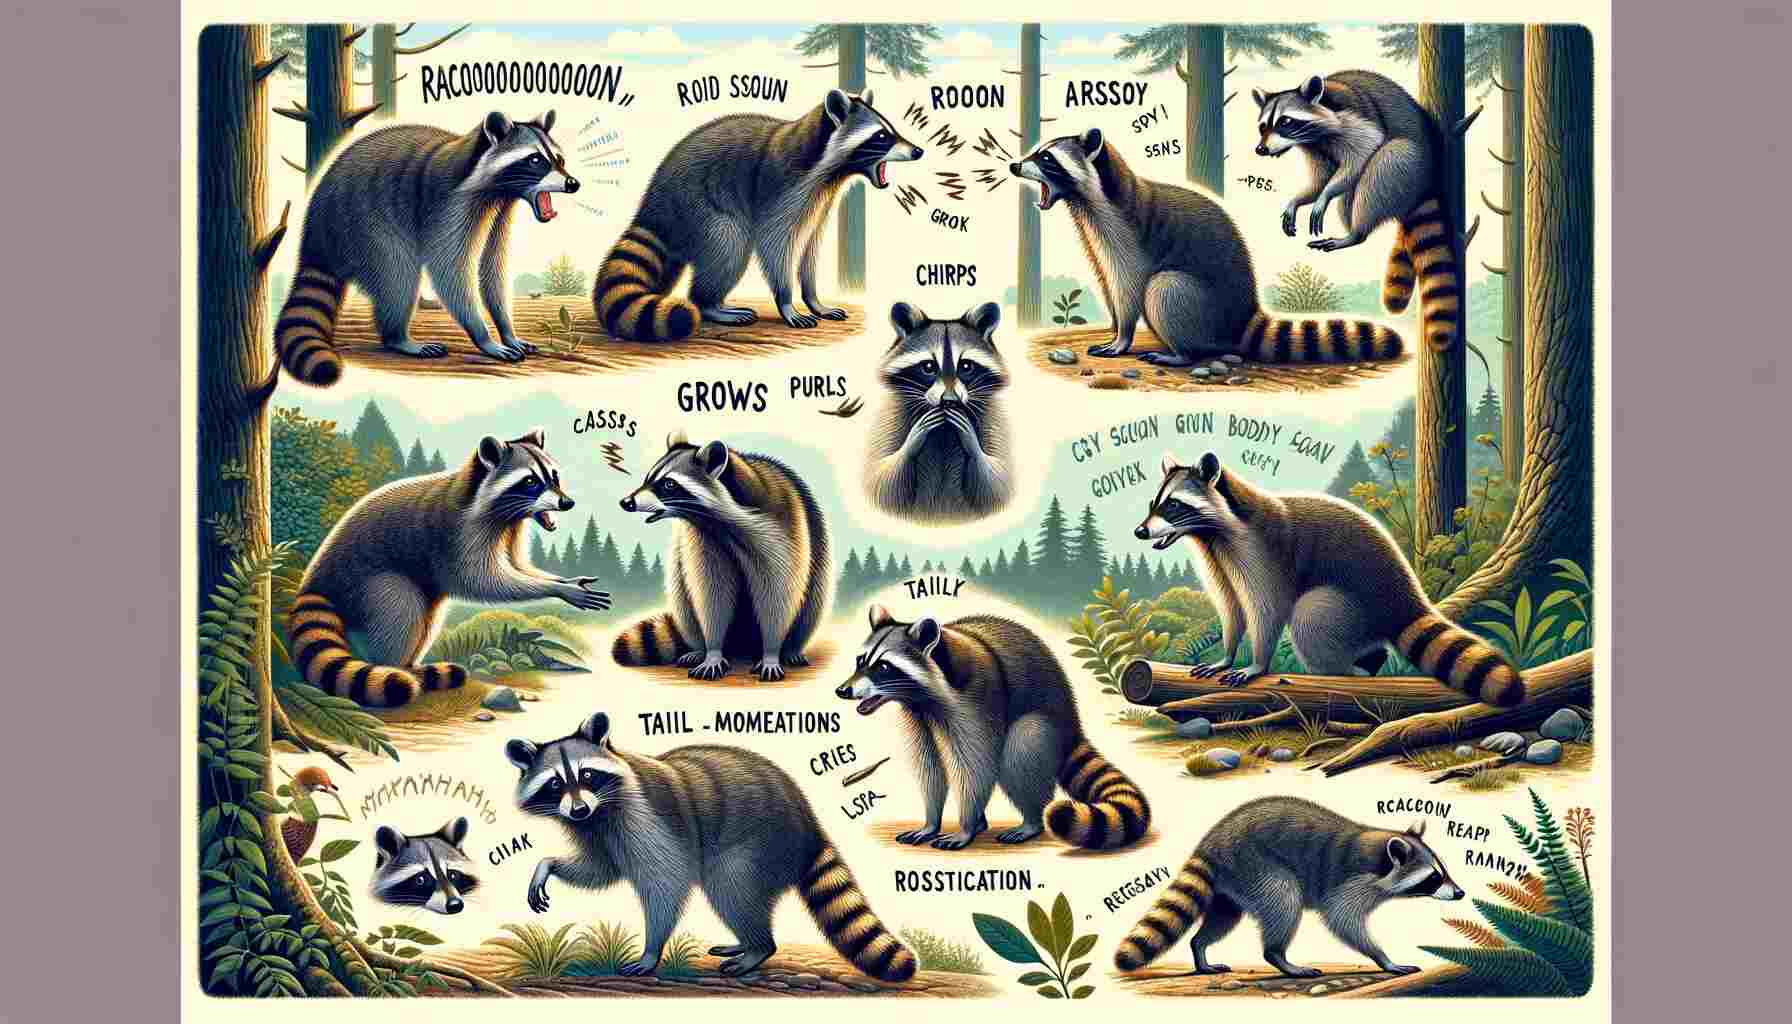 Illustration of raccoons communicating in a woodland setting, using vocalizations and body language, surrounded by trees and foliage.